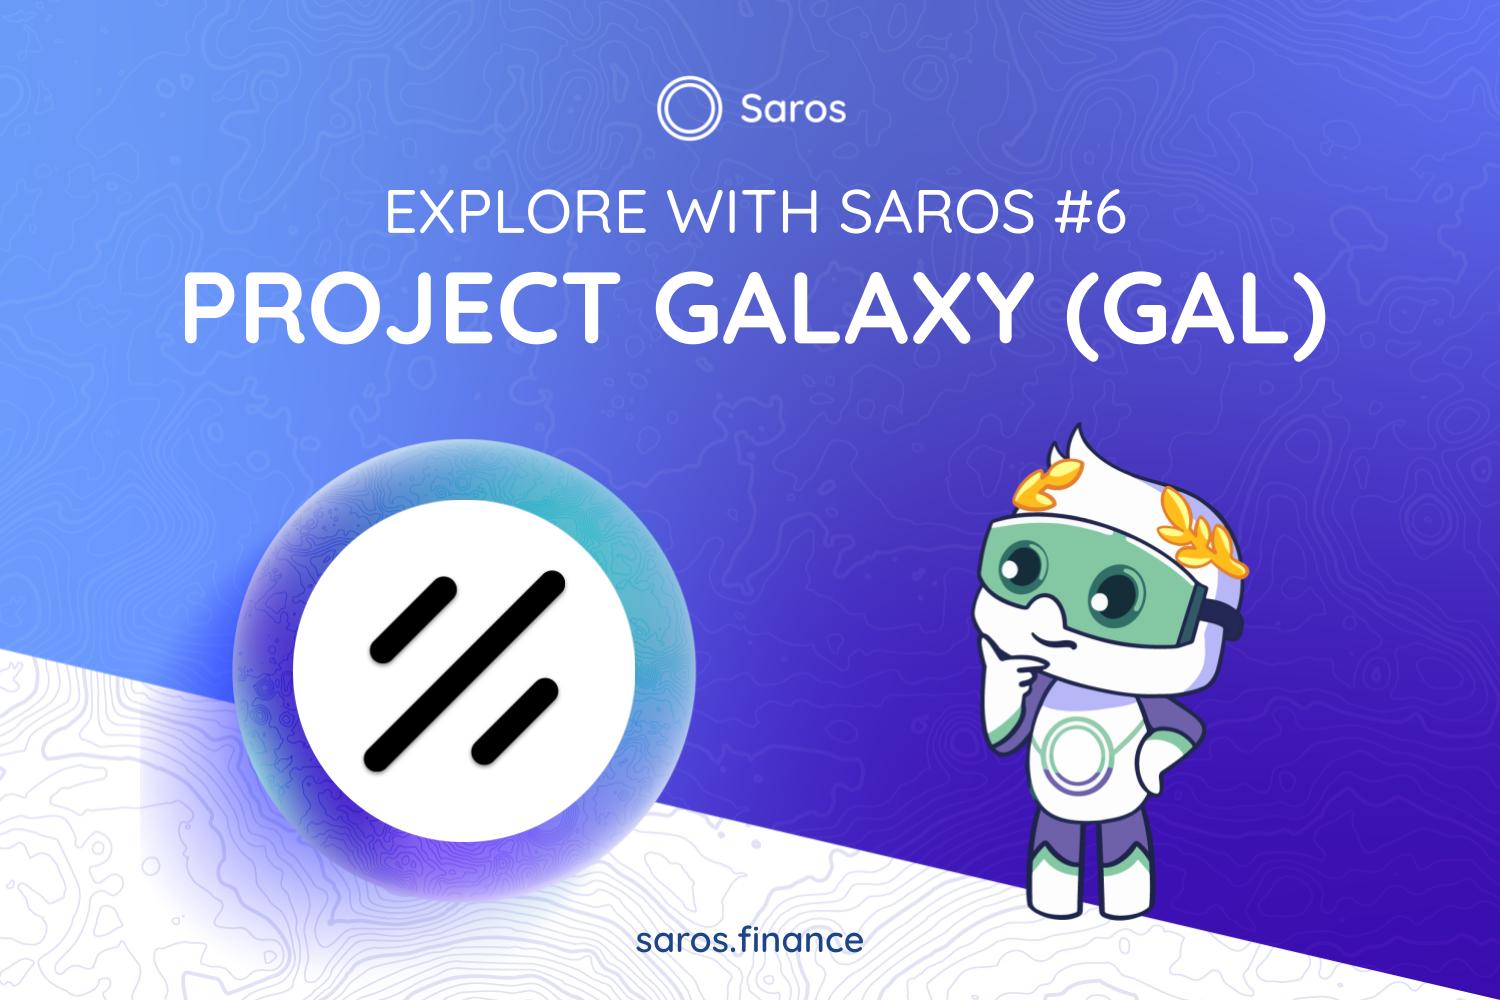 Explore with Saros #6: Everything you need to know about Project Galaxy (GAL)